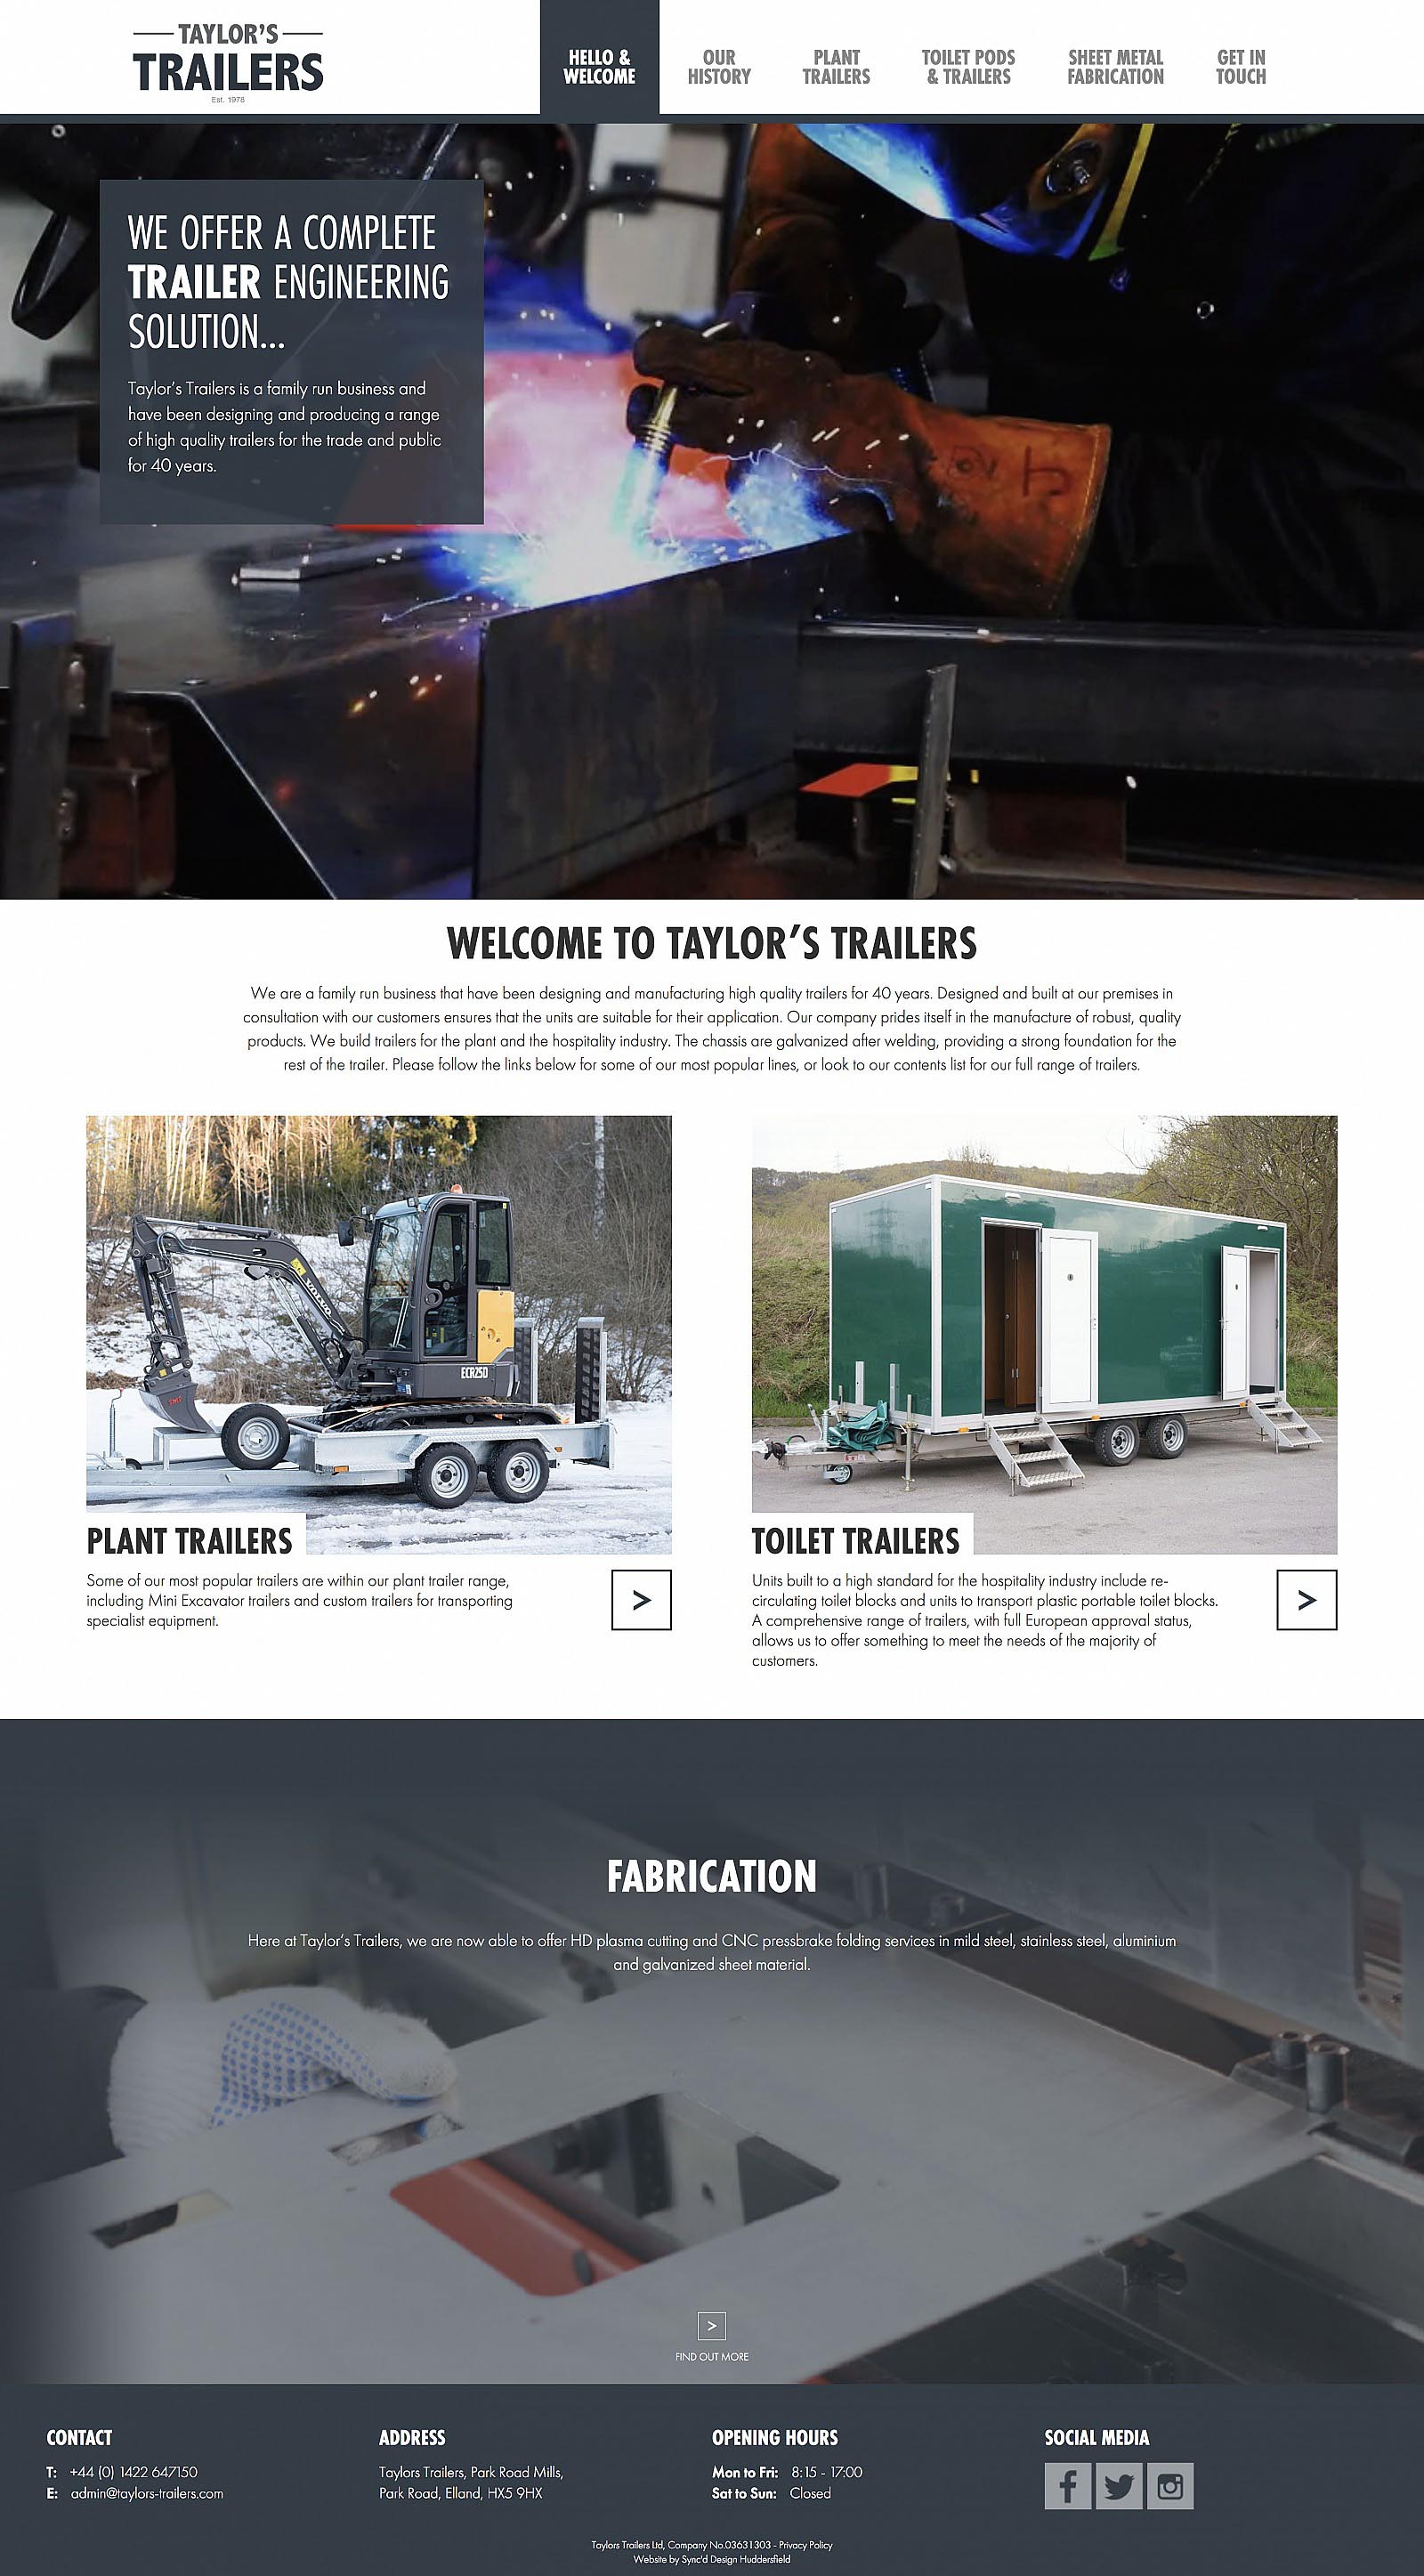 Taylors Trailers Home Page